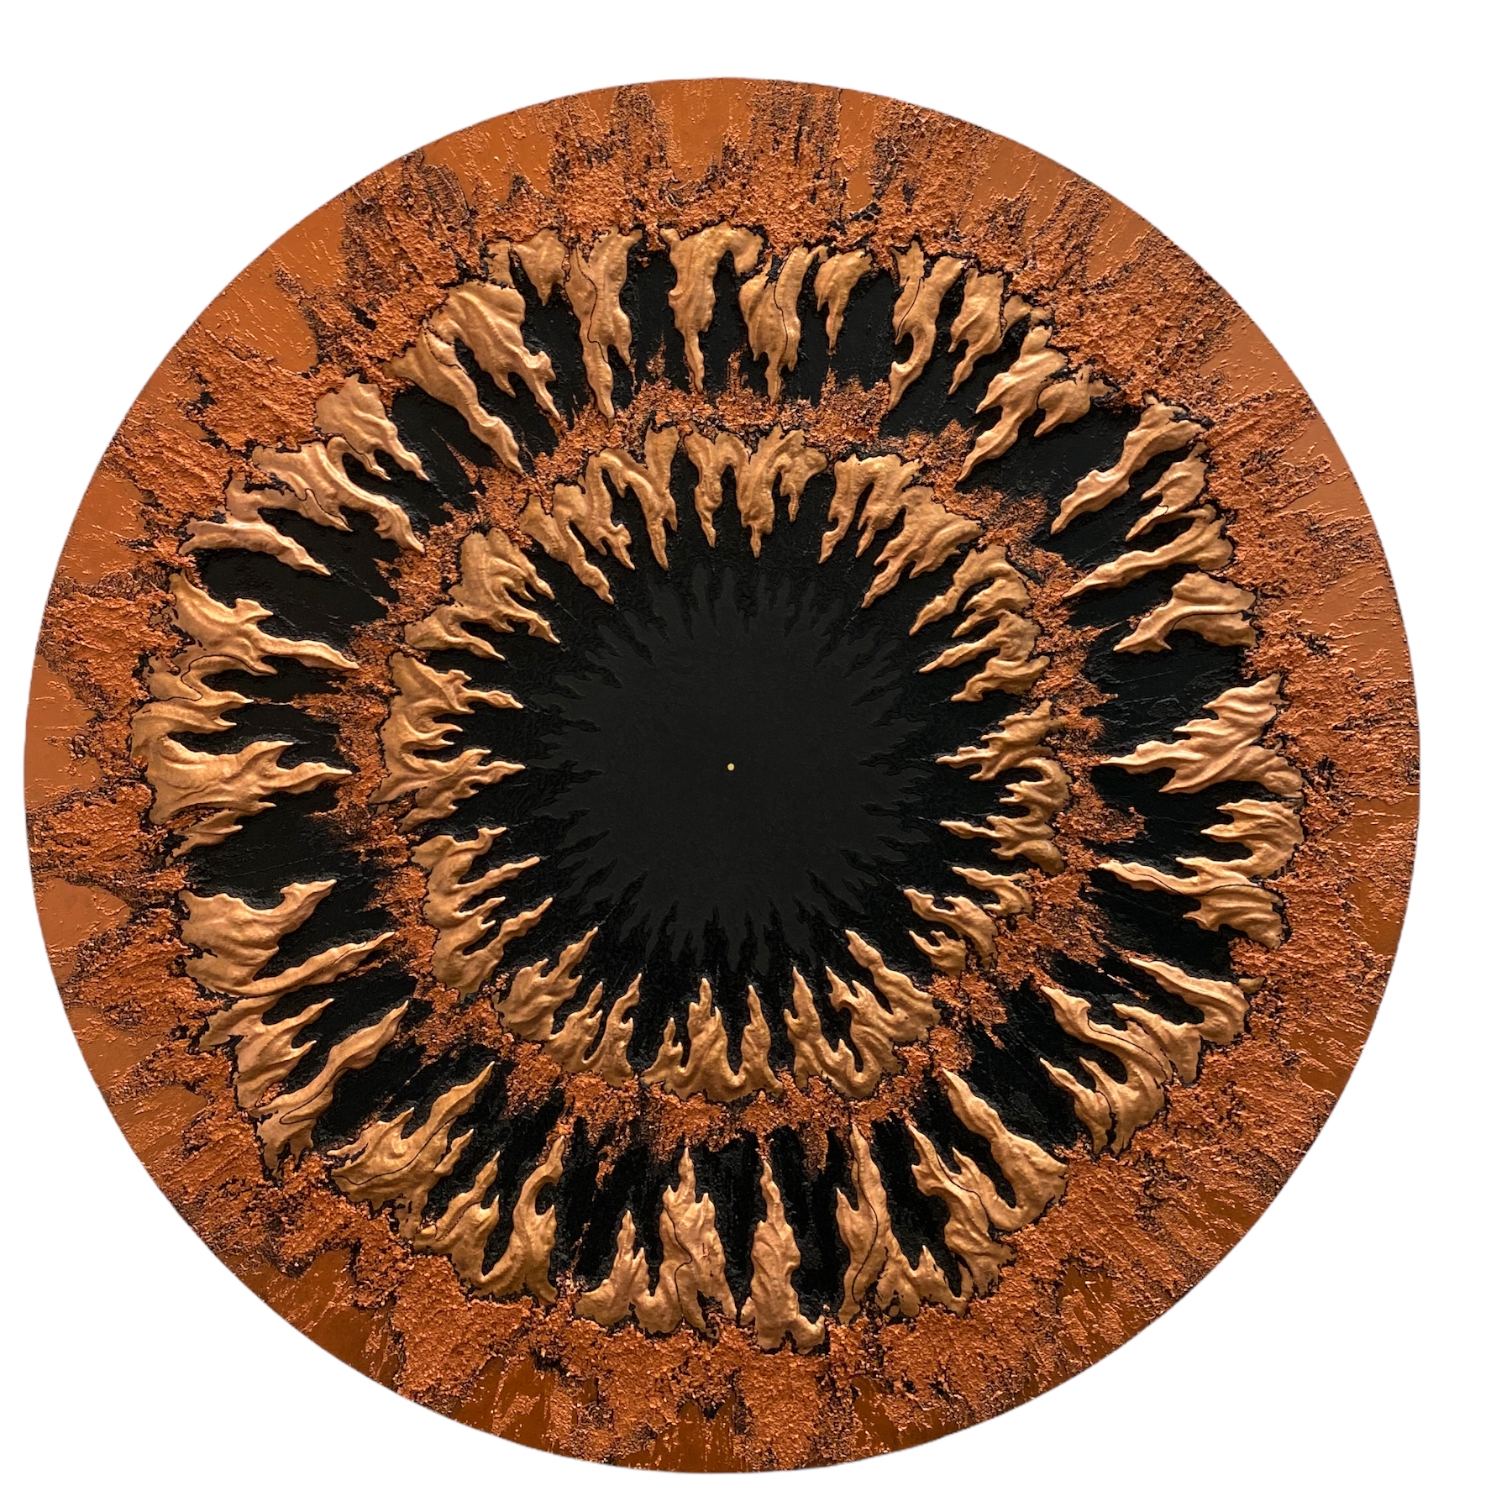 Atman 7, 36&quot; Diameter, Copper Repousse Elements, 23.5K Gold, Abraded Acrylic And Mineral Particles On Archival, Cradled Wood Panel